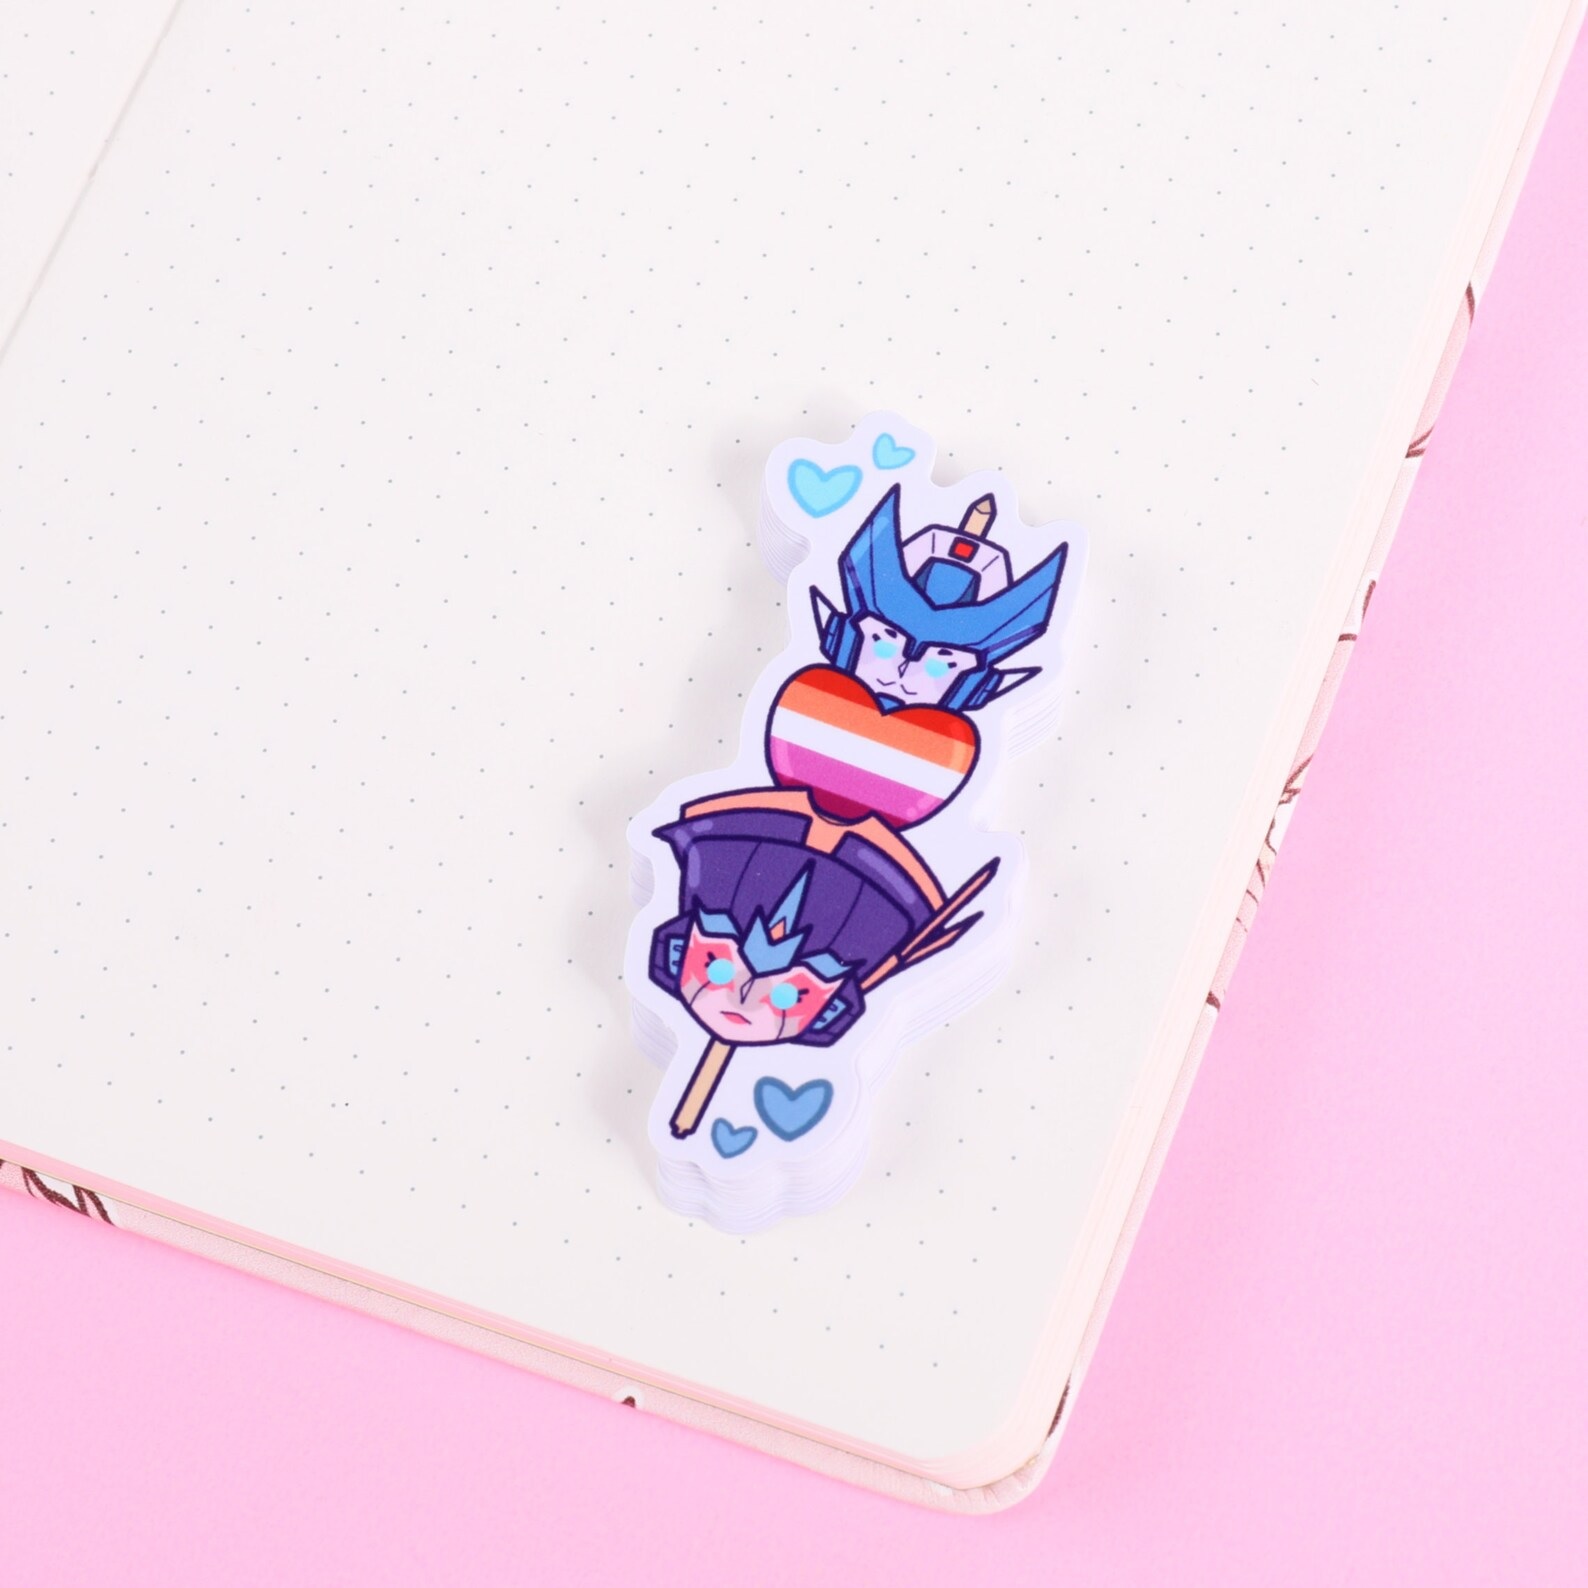 A sticker with the Transformers characters Chromia and Windblade stacked atop each other with a lesbian pride heart in between